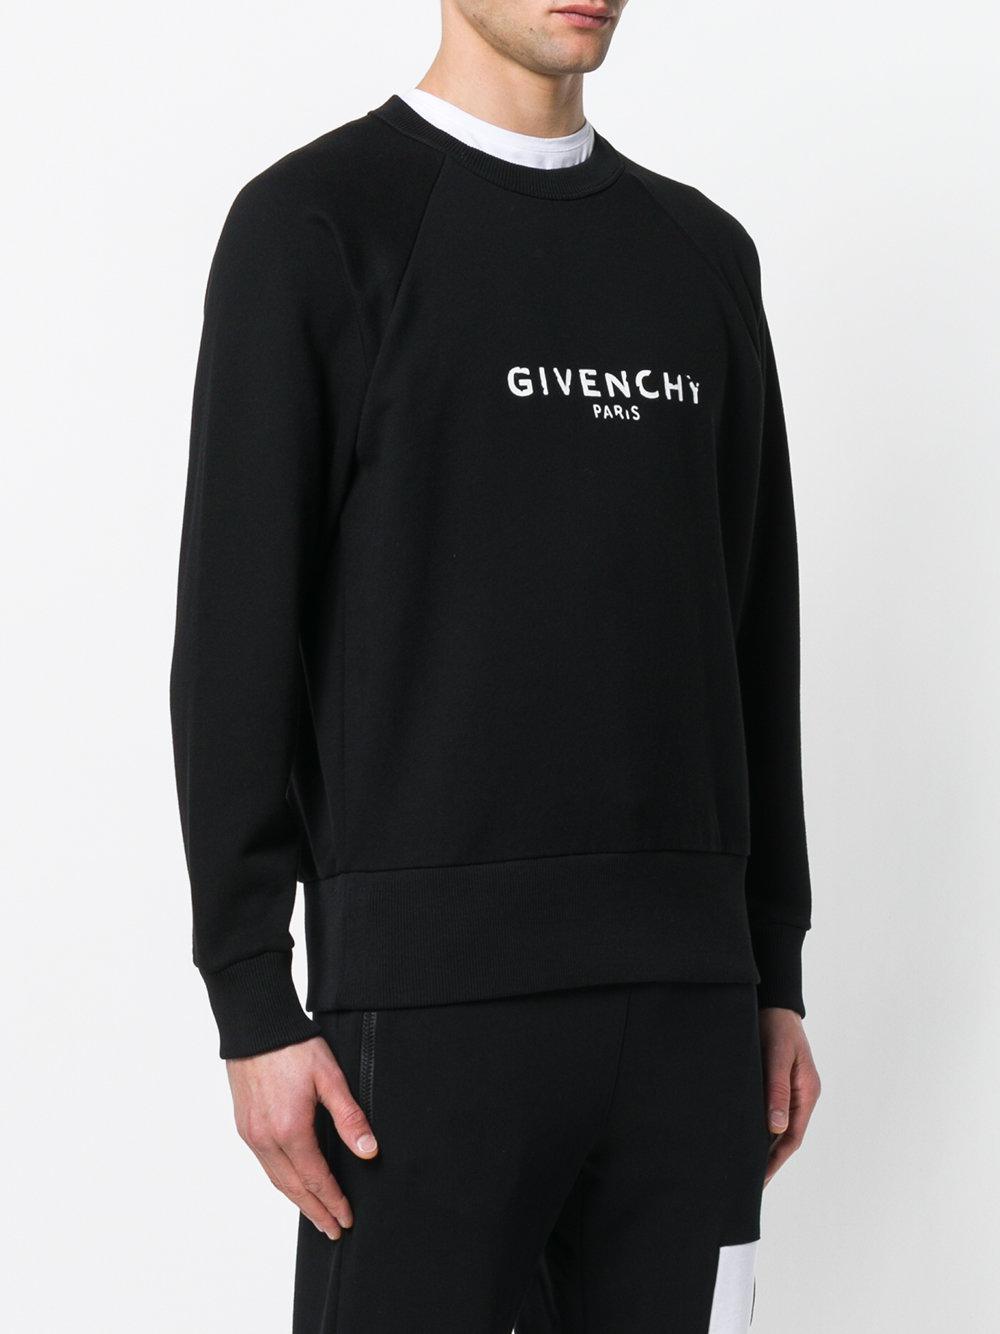 givenchy mens sweatsuit